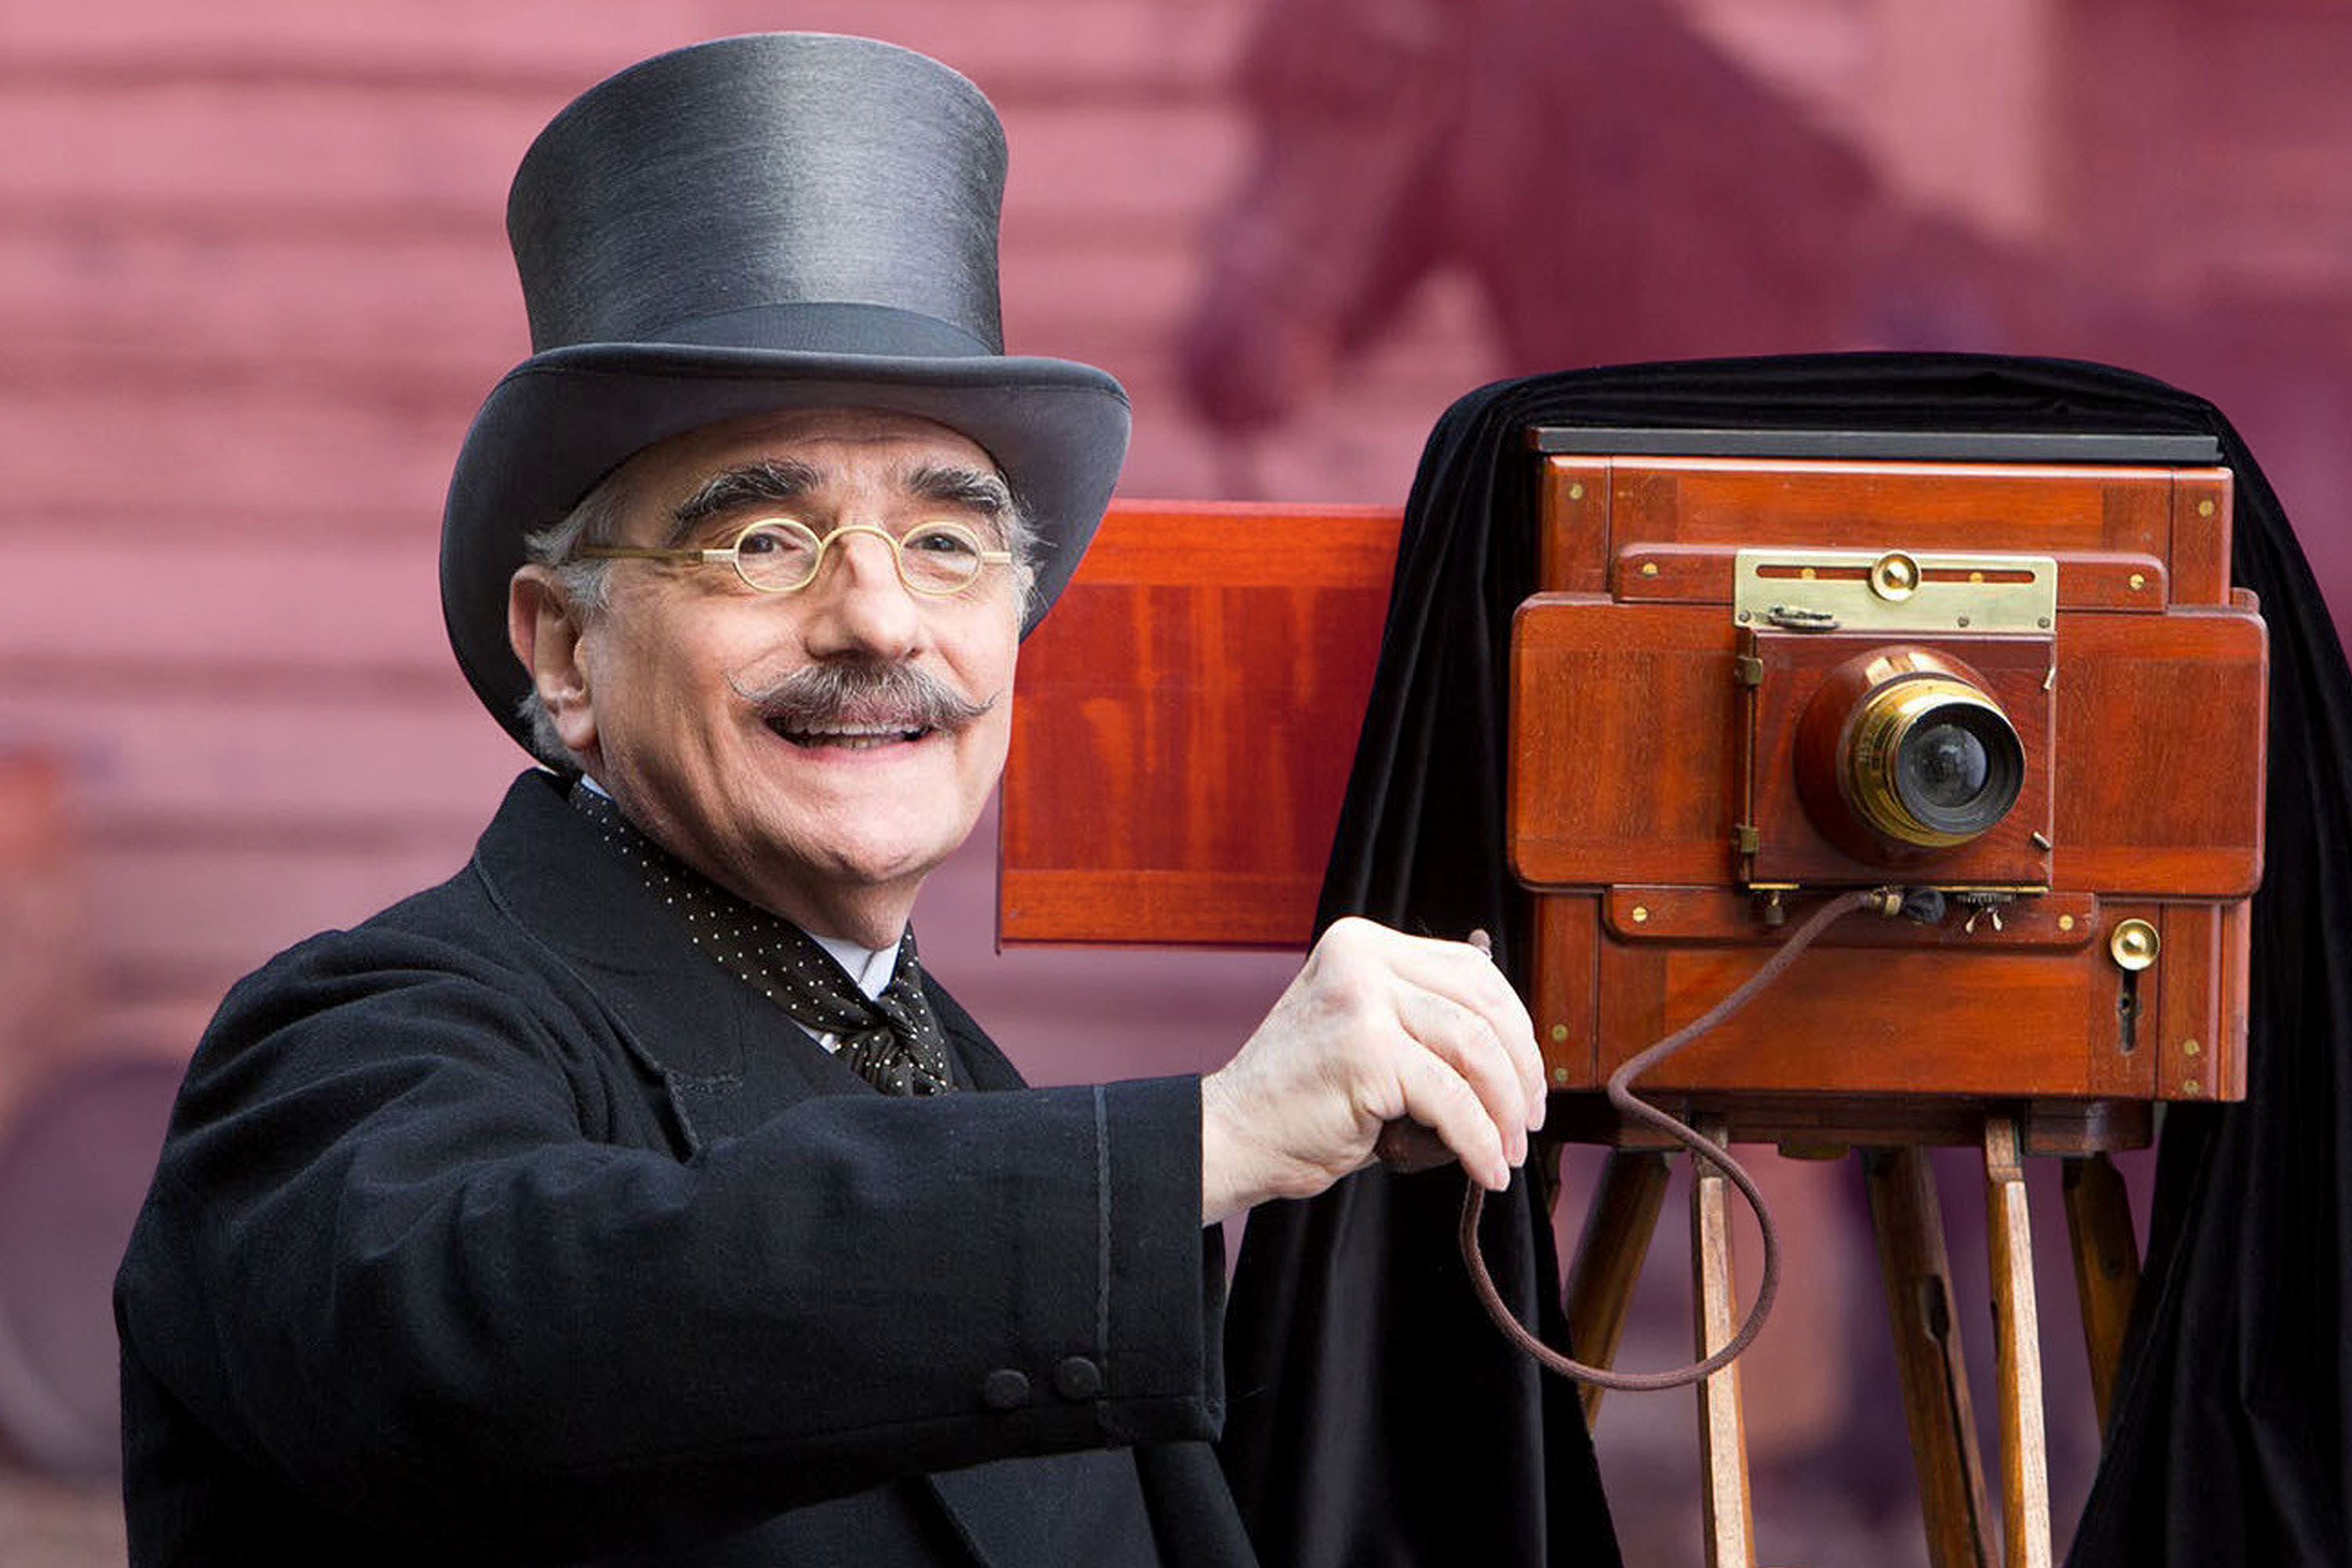 Martin Scorsese is top hat and coat with vintage camera